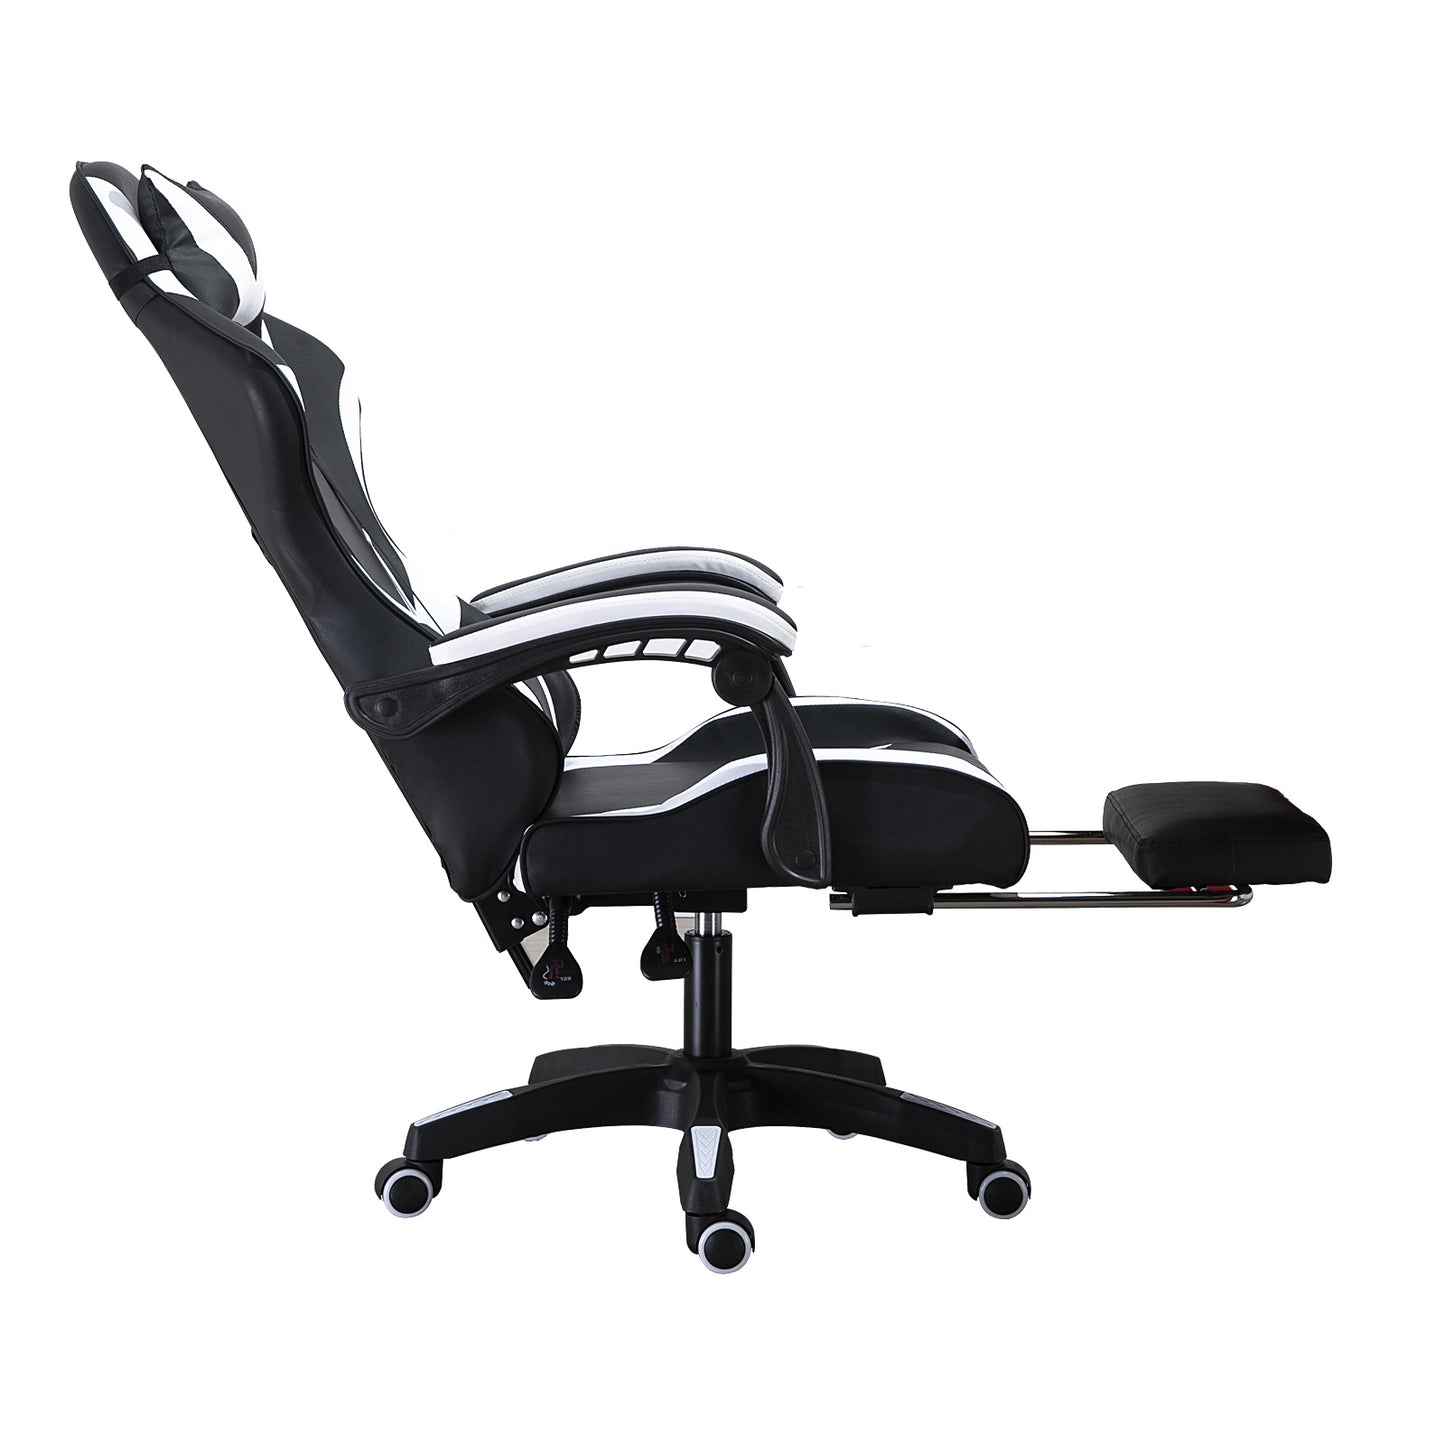 PU gaming chair, swivel recliner with adjustable backrest and seat height, high back gaming chair with footrest, office chair with 360° swivel, suitable for office or gaming